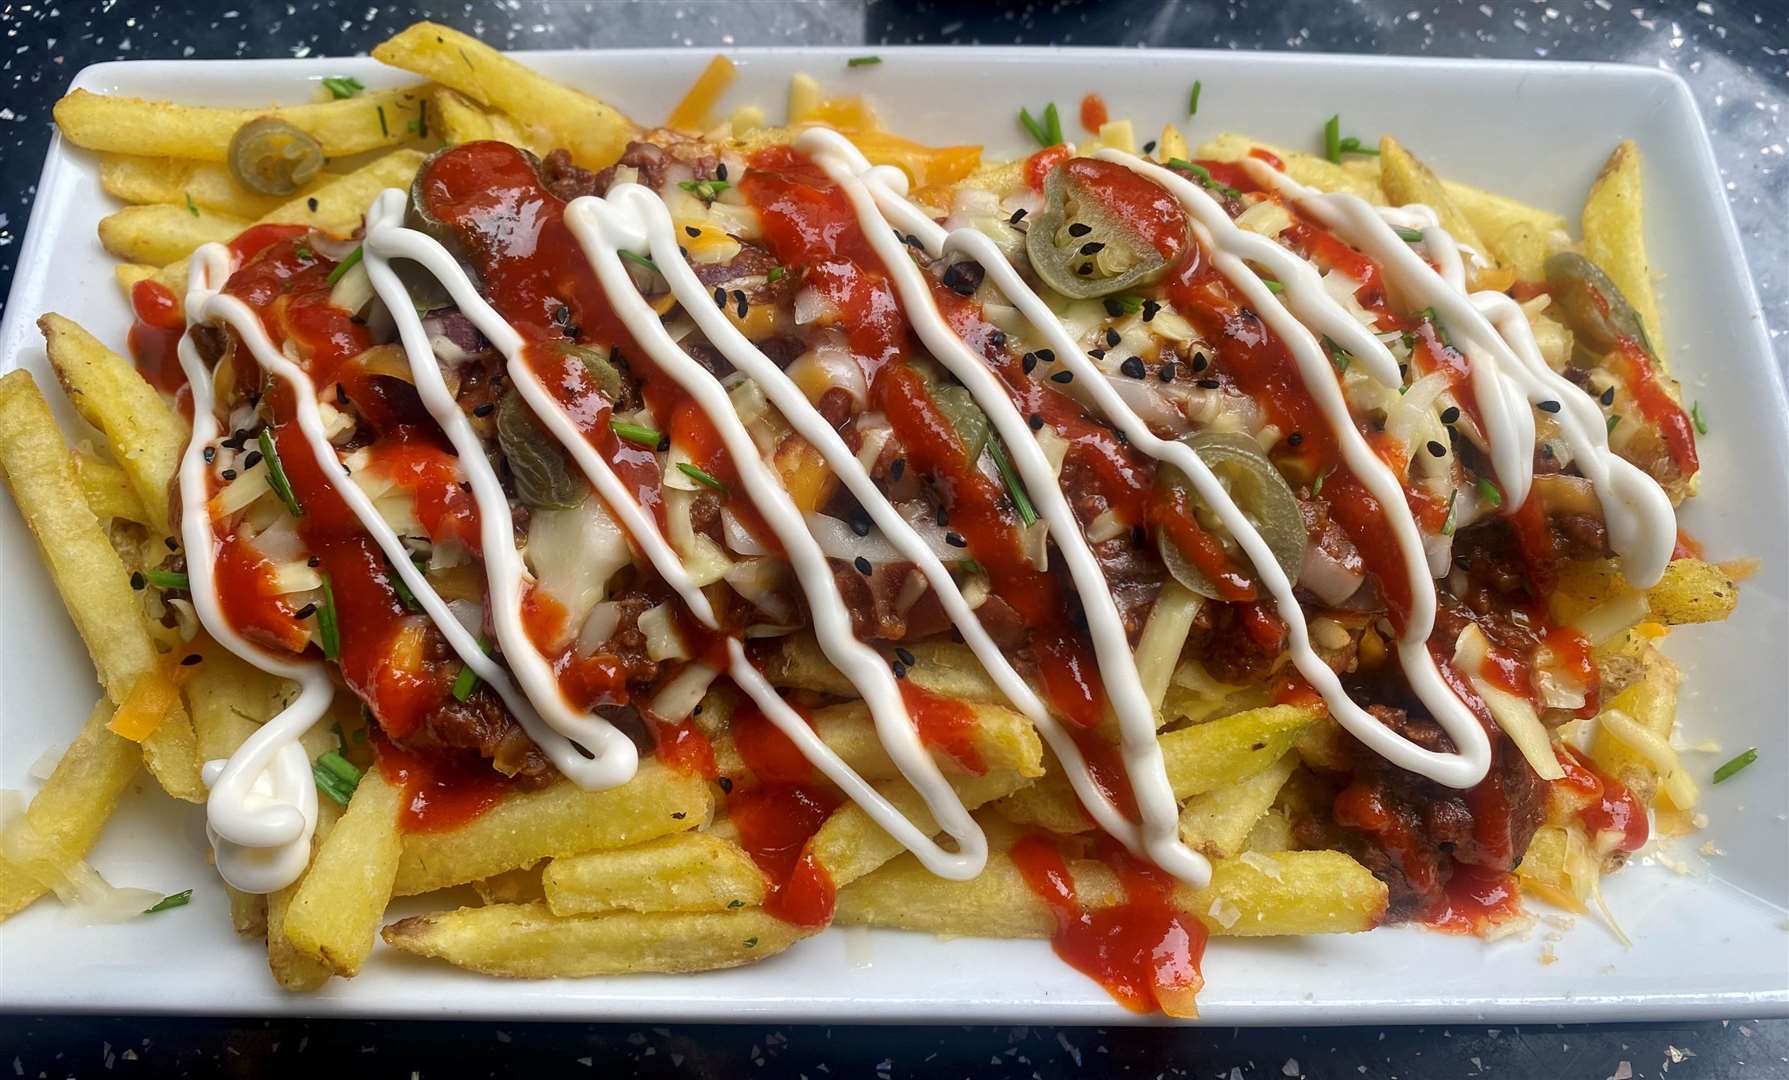 The spicy loaded fries came with hot sauce, chilli-non-carne and jalapeno peppers.